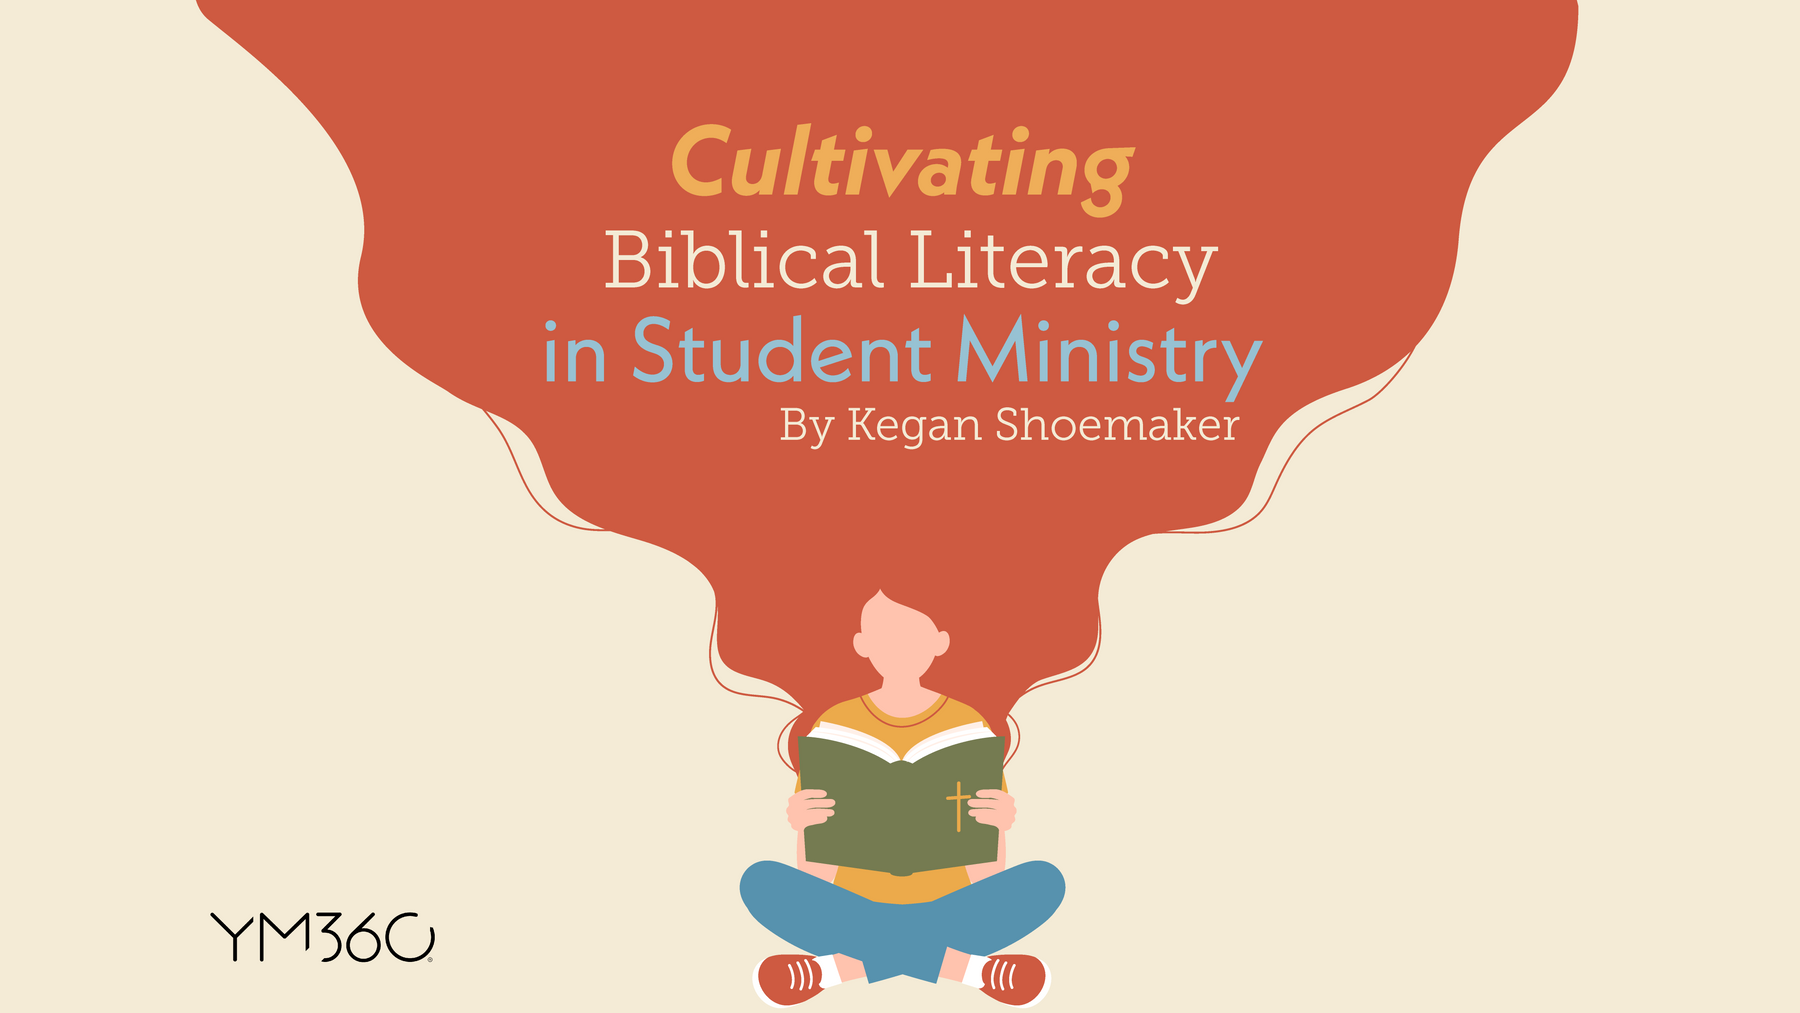 Cultivating Biblical Literacy in Student Ministry